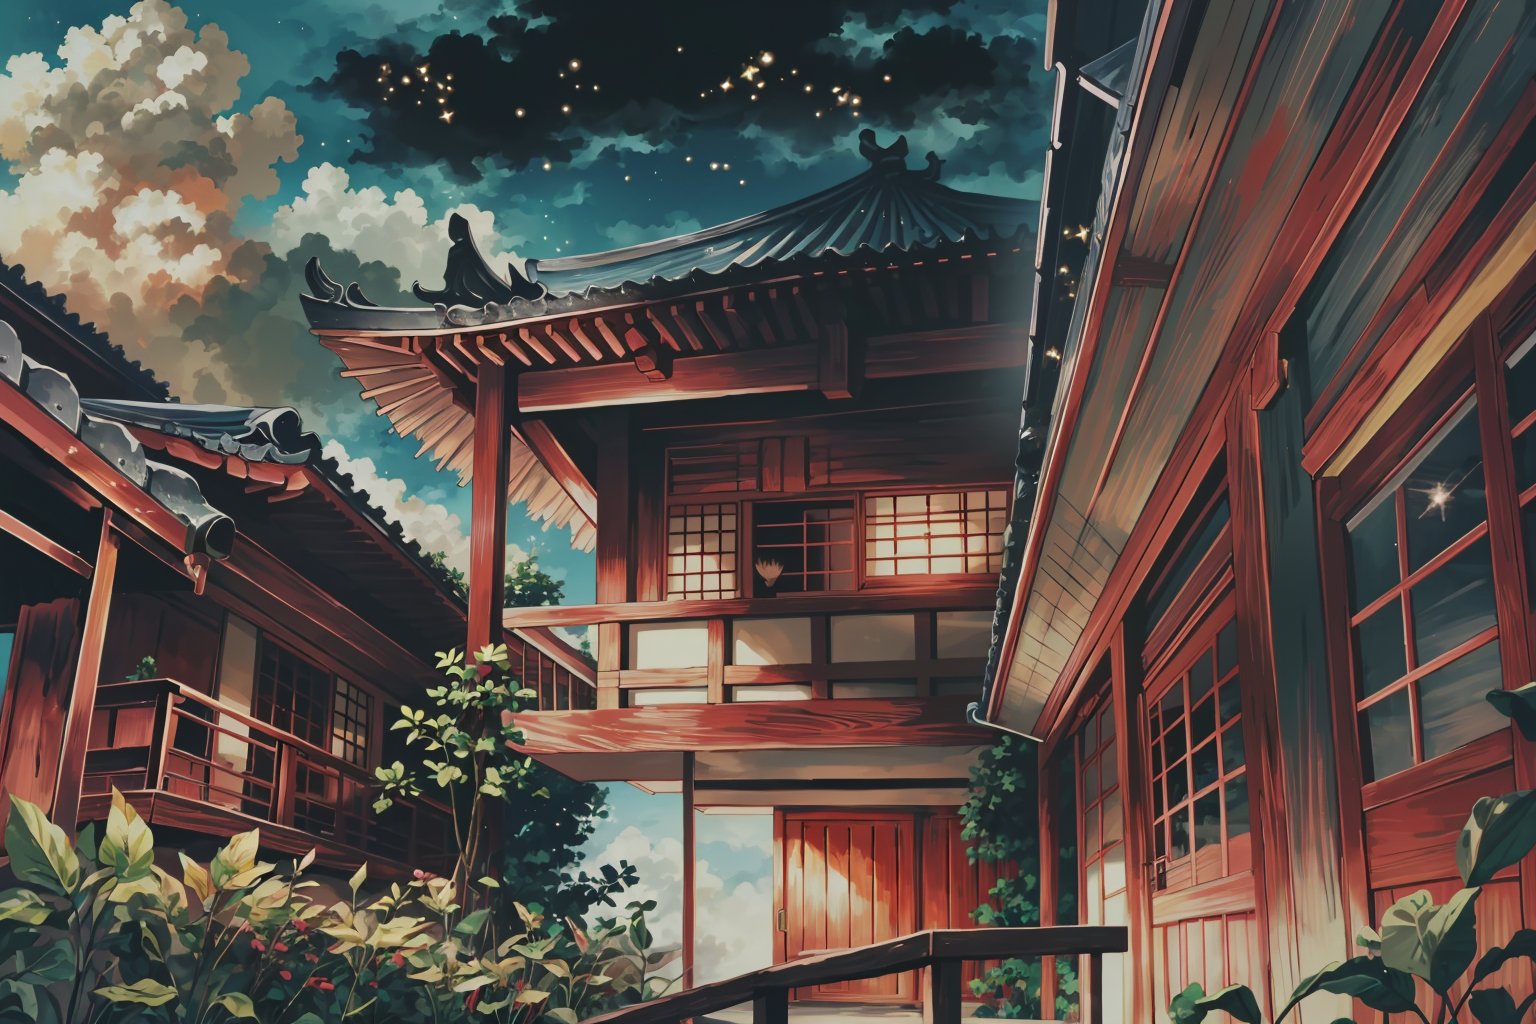 (Masterpiece, Best Quality:1.2), highres, official art, Ninjascroll, (Traditional media), 90's anime style, (ultra-detailed landscape), ((8k resolution wallpaper)), fantasy setting, (full angle view:1.2), (no humans:1.3), (anime screen:1.1), cinemascope aspect ratio, HDR, black background:0.4, ((bloom:1.1)), glow:0.5, bokeh:0.4, (night sky, night, dark:1.3), (perfect shadows), fantasy, (gradients), floating particles, gorgeous, dynamic, [extremely detailed background], (textured), nature, (scenery),[flowers:0.6], east asian architecture, wooden floor, (cinematic lighting:1.1), film grain:0.6, ( Fujifilm XT3 ), water, inverted reflection, wind, (atmosphere),  bamboo forest in background mist, (indoors, dark room:1.3), sharp focus, volumetric lighting, 85mm, (shallow depth of field), intricate, (details:1.2), perfect composition:1.1,  <lora:NinjaScroll-10:0.8>,  <lora:epiNoiseoffset_v2:0.4>